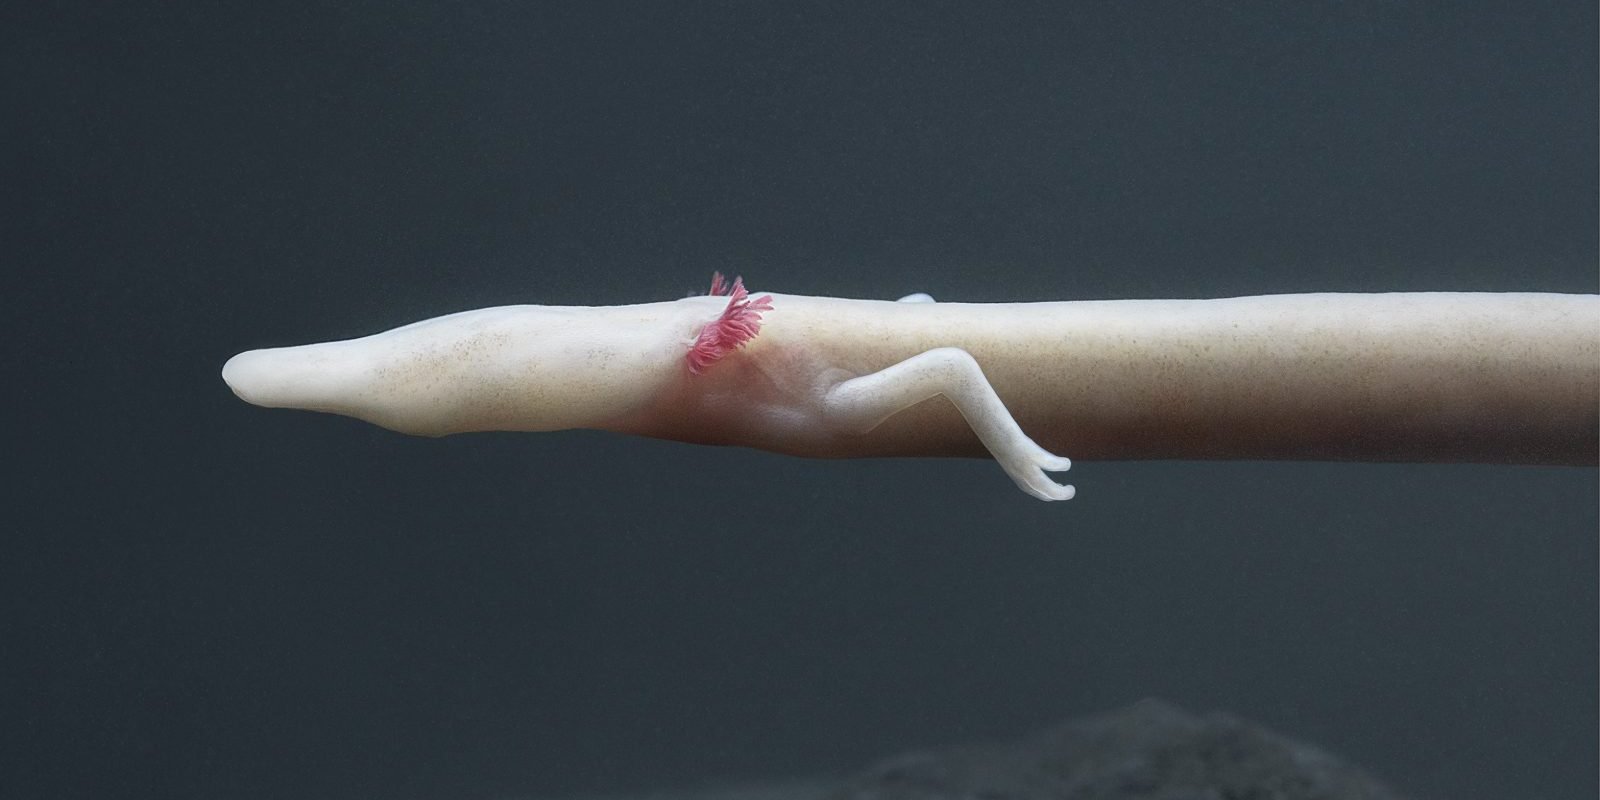 olm salamander e1557382168494.jpg?resize=412,275 - 50 Photographies Of Endangered Species That Will Blow Your Mind By Tim Flach